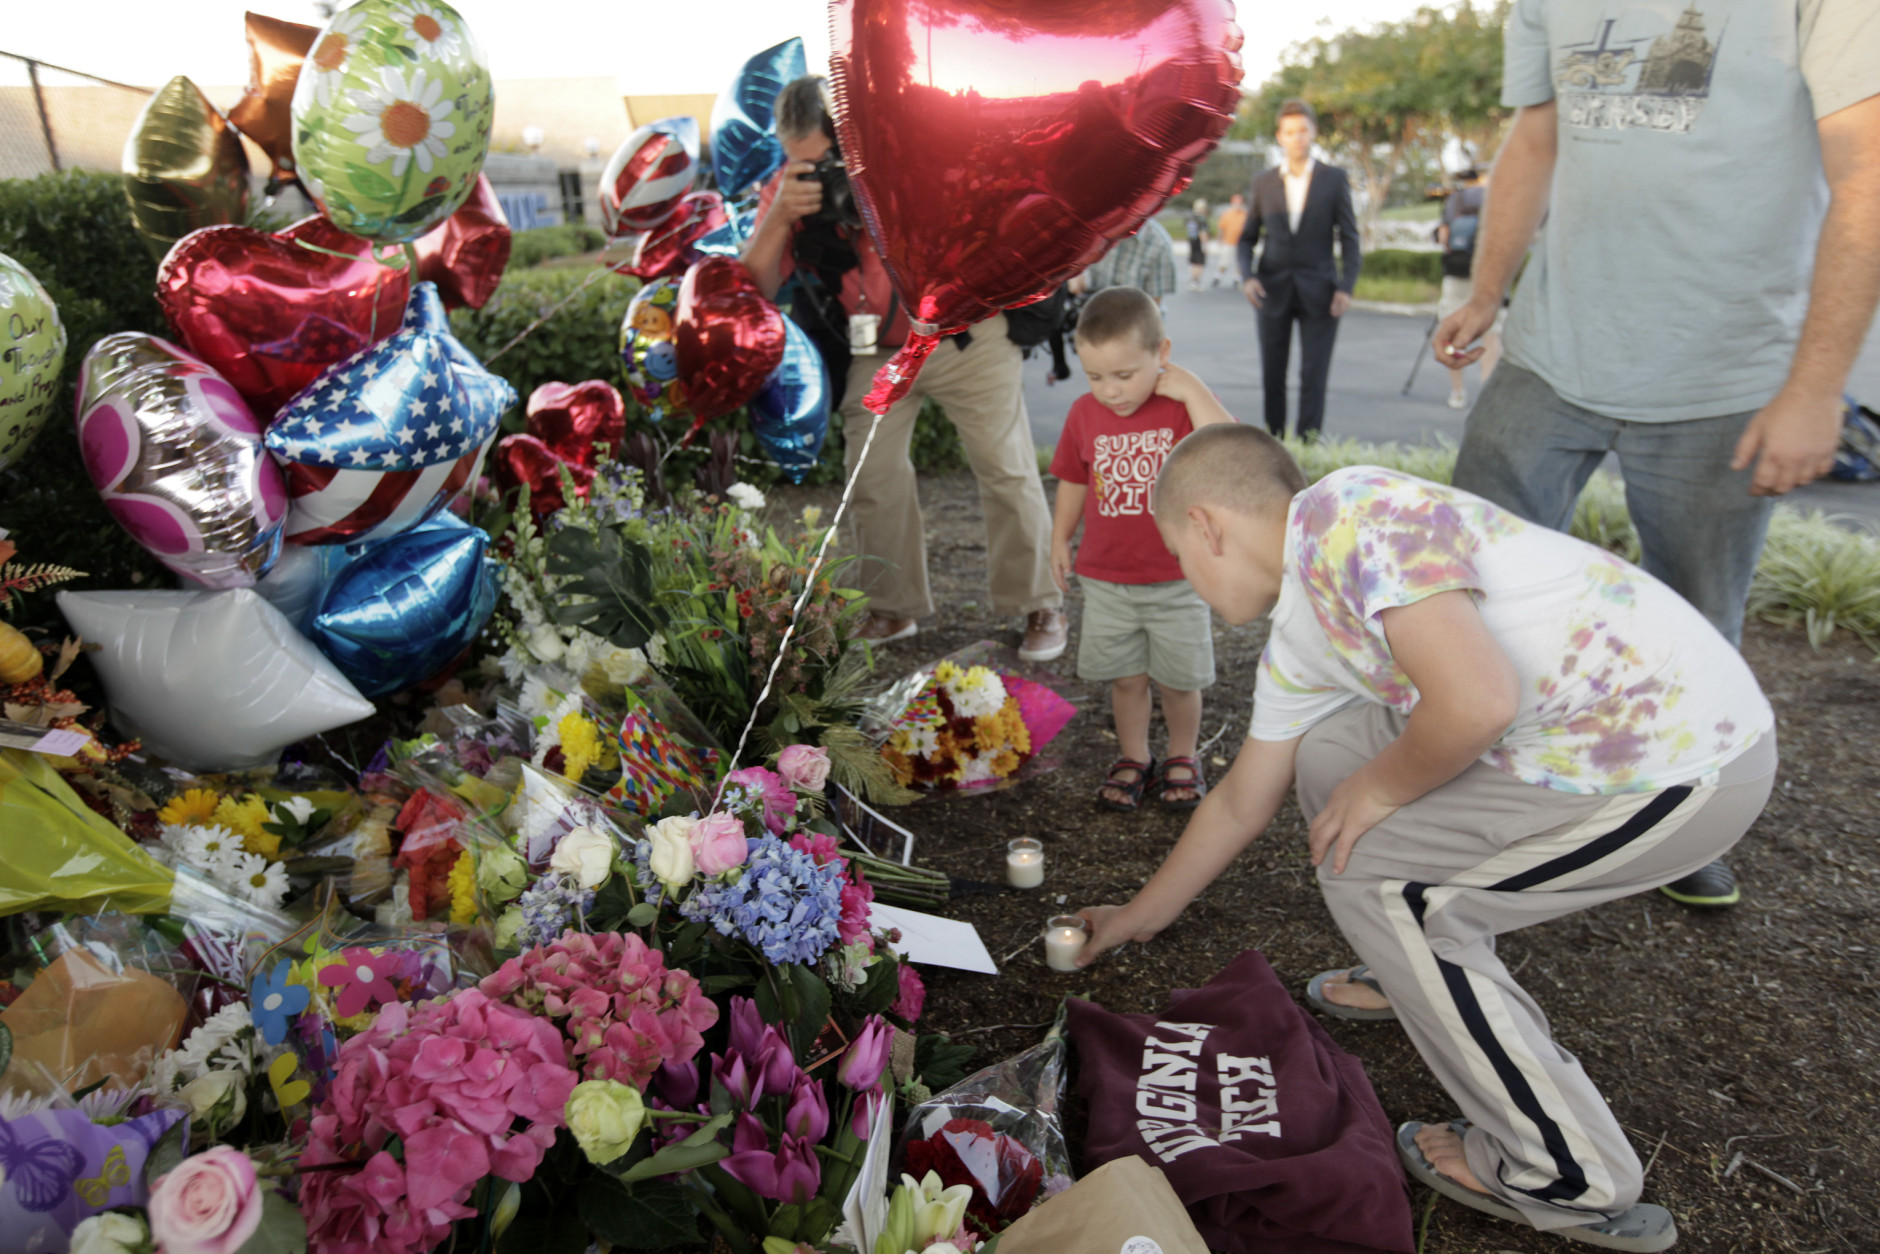 ROANOKE, VA - AUGUST 26: Jason and Patricia Grice and their sons Matthew Fajardo, 11, and William , 3, (background) bring flowers and candles to a memorial for the two journalists that were killed this morning during a live broadcast on August 26, 2015 in Roanoke, Virginia. Two employees of WDBJ TV were killed this morning during a live broadcast at Bridgewater Plaza on Smith Mountain Lake. The victims have been identified as reporter Alison Parker and cameraman Adam Ward. Parker, 24 and Ward, 27, worked for WDBJ in Roanoke, Virginia. The suspect, Vester Lee Flanigan, also known as Bryce Williams, died of a self-inflicted gunshot wound. (Photo by Jay Paul/Getty Images)